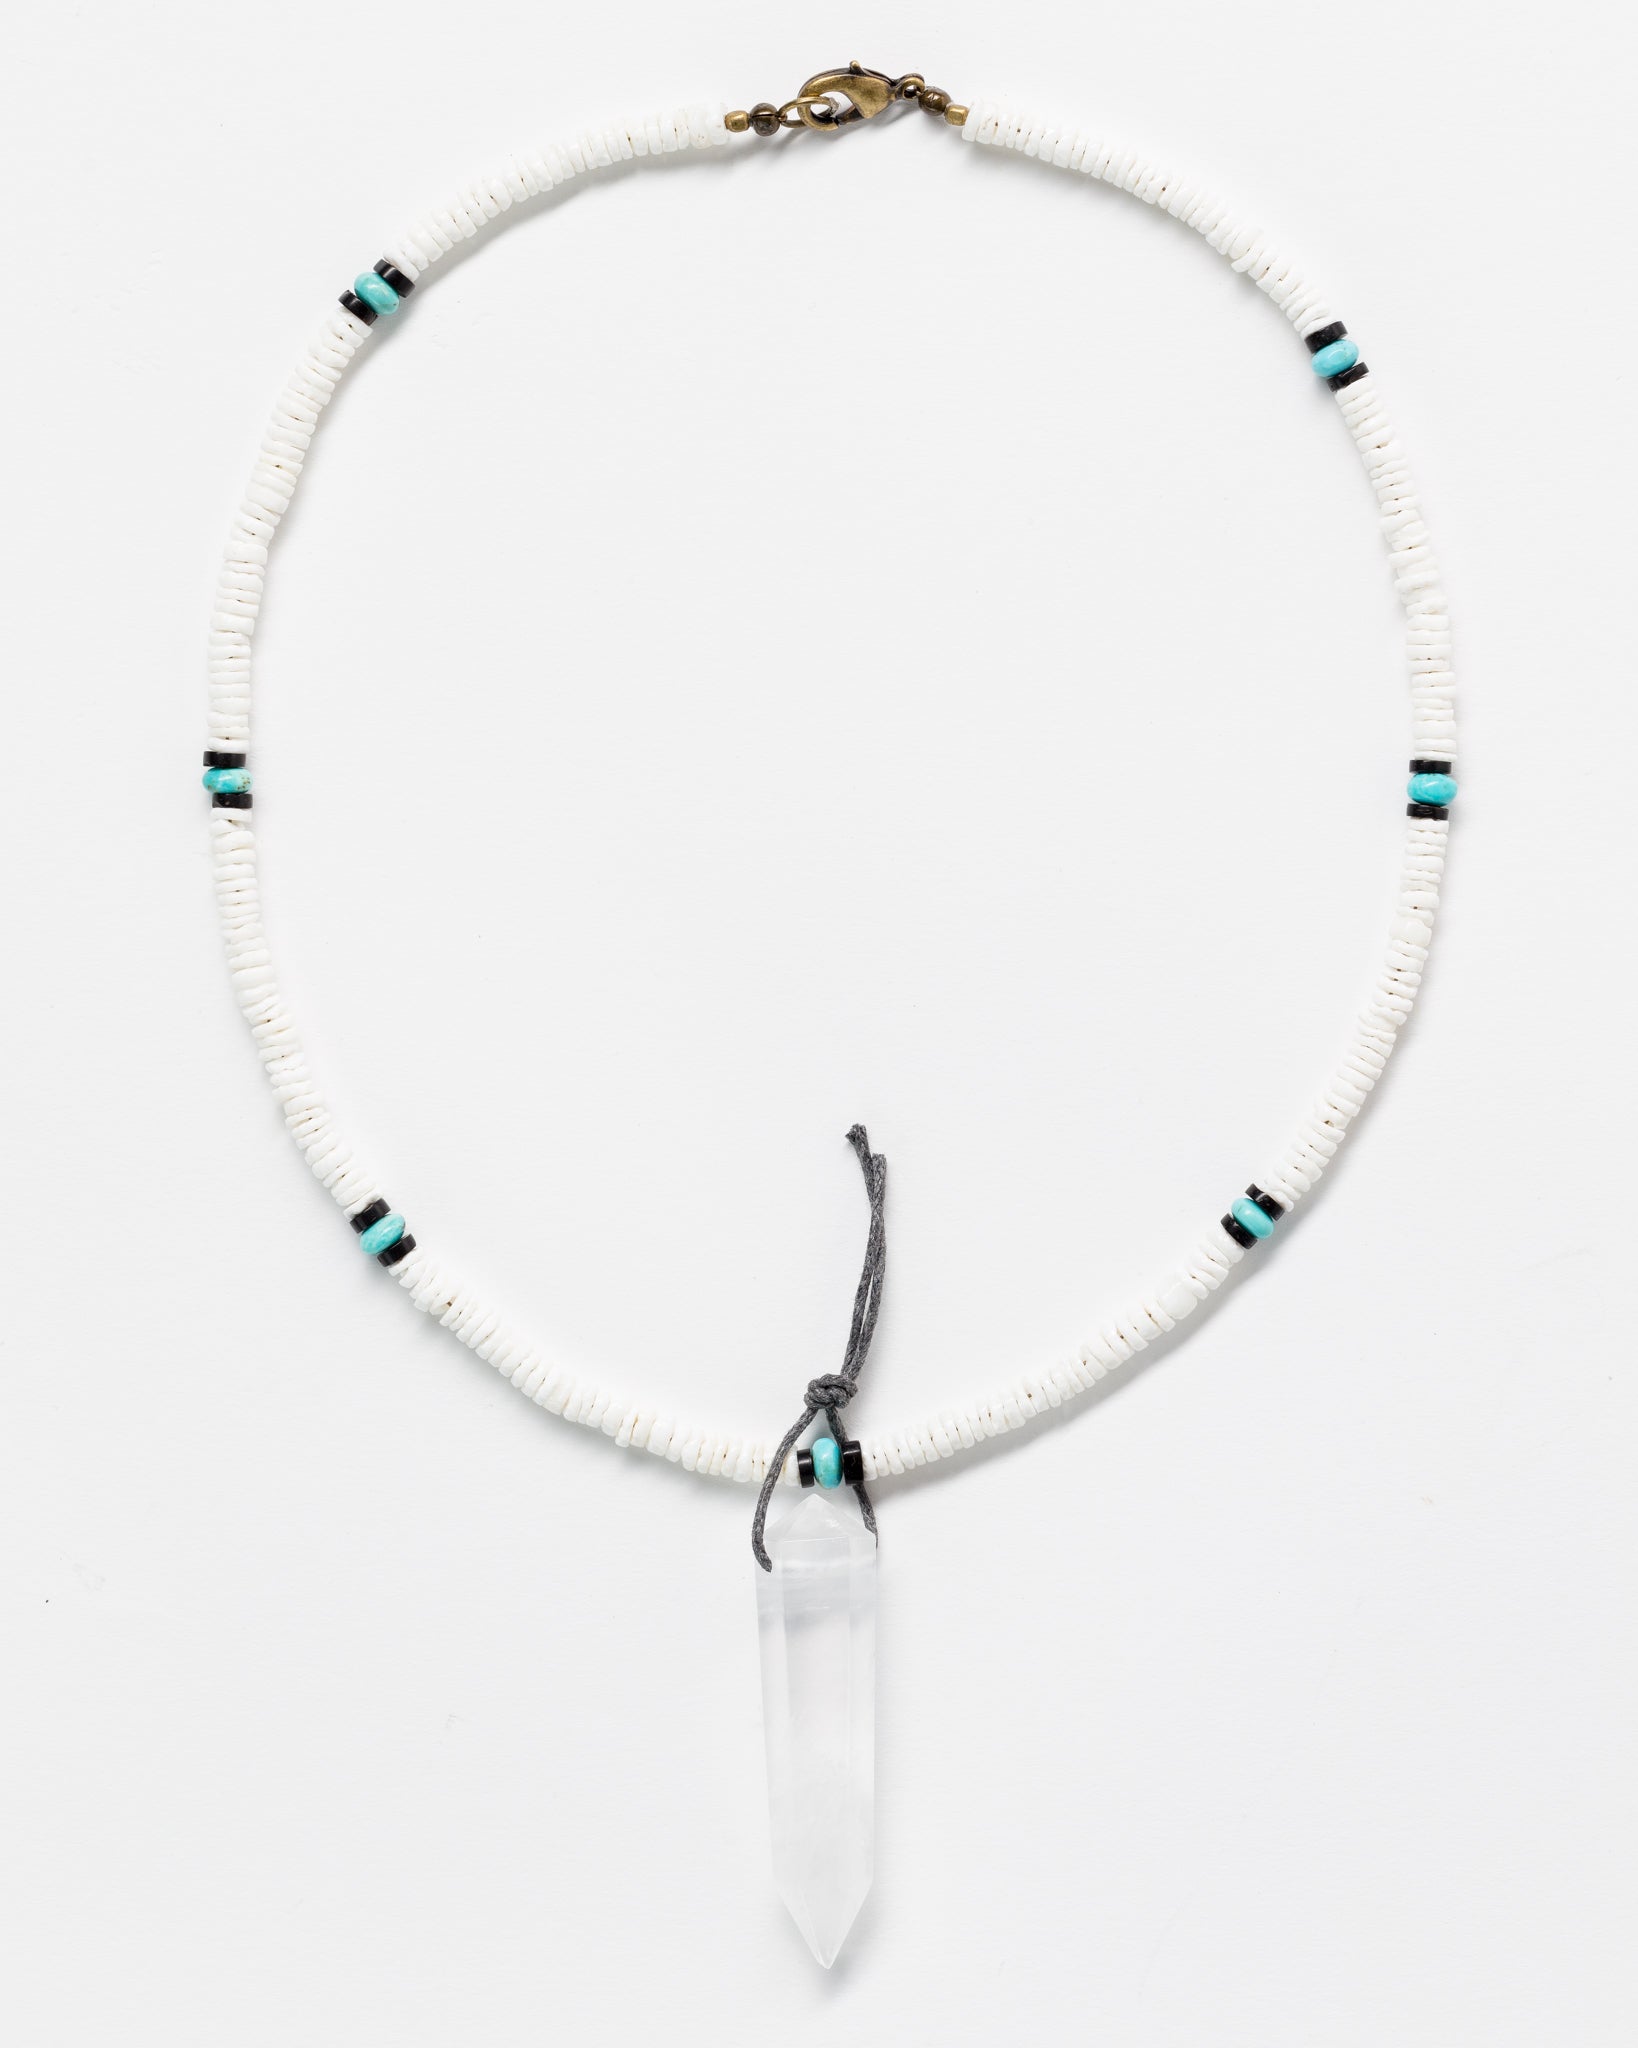 A Designs By Raya necklace with a White Designs By Raya pendant and small beads, featuring a mix of Arizona turquoise and white colors, set against a plain white background.